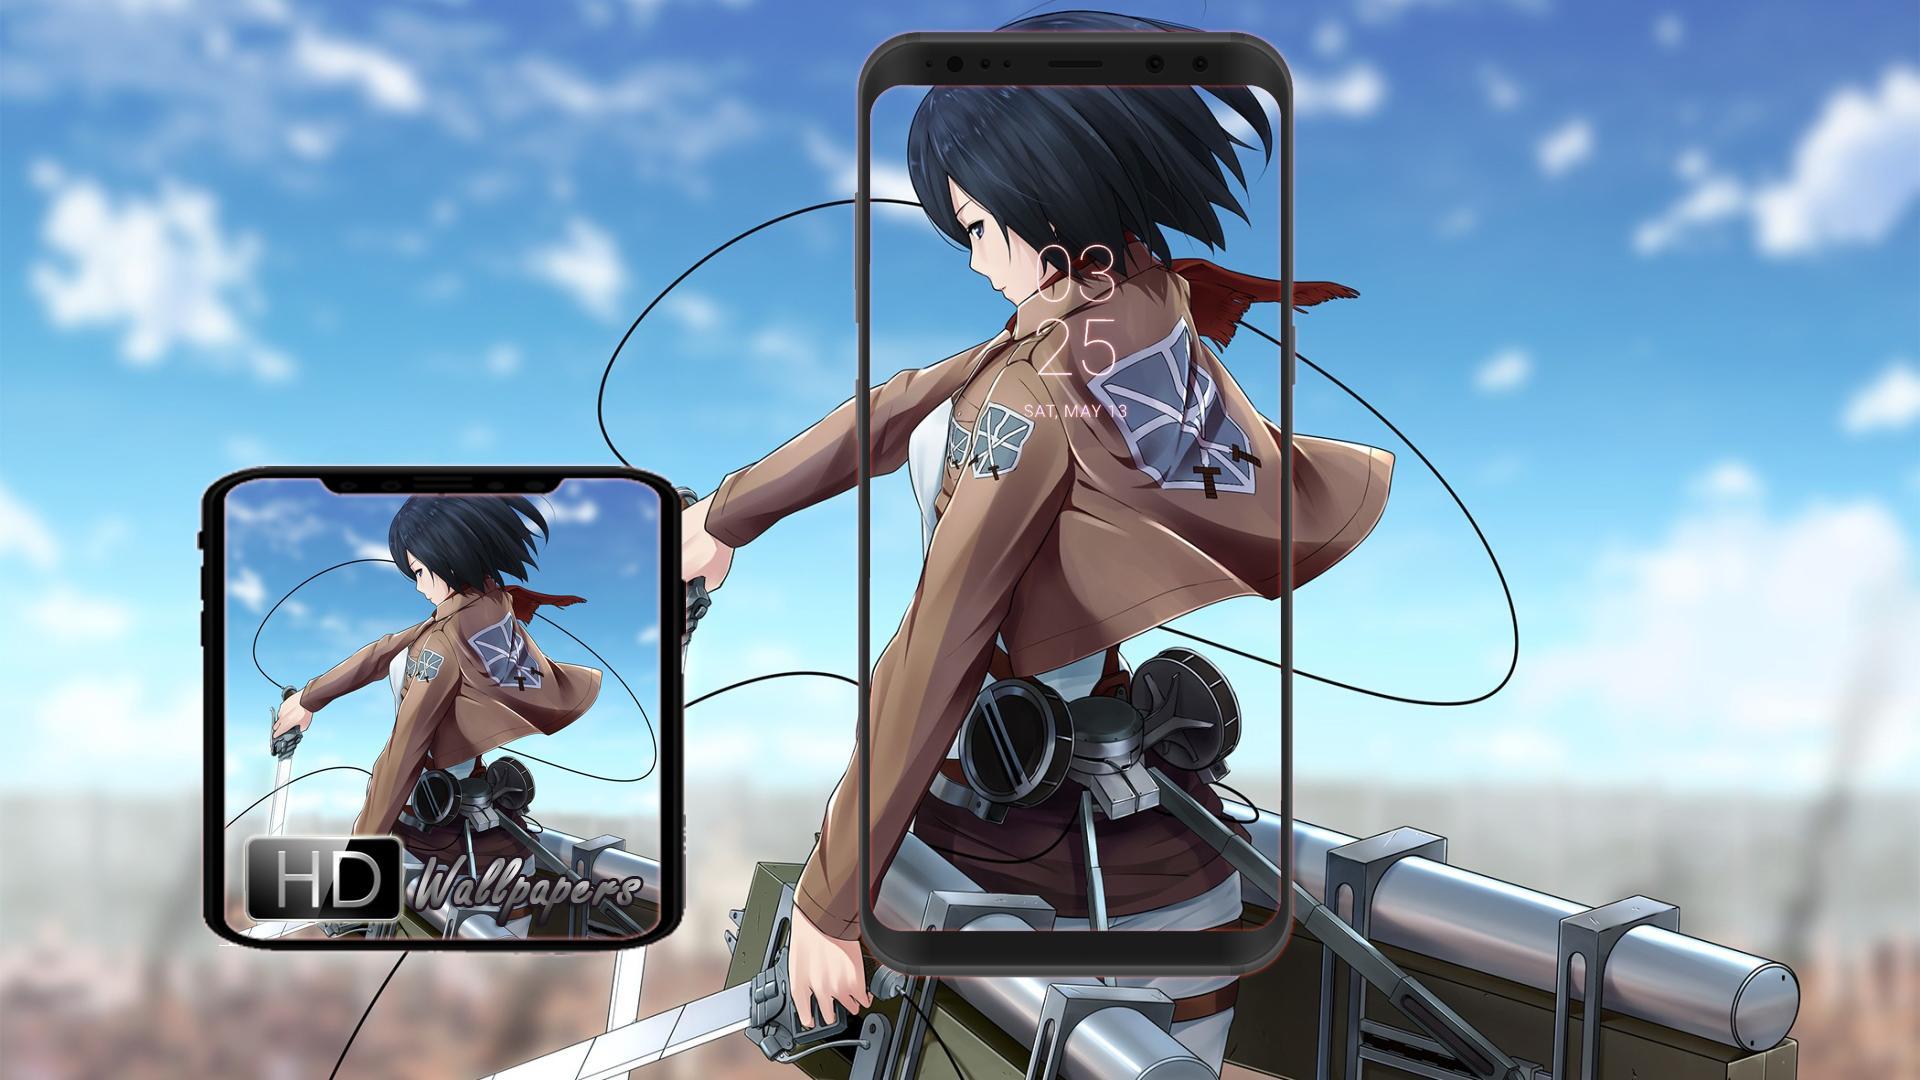 Anime Attack On Titan Hd Wallpapers For Android Apk Download